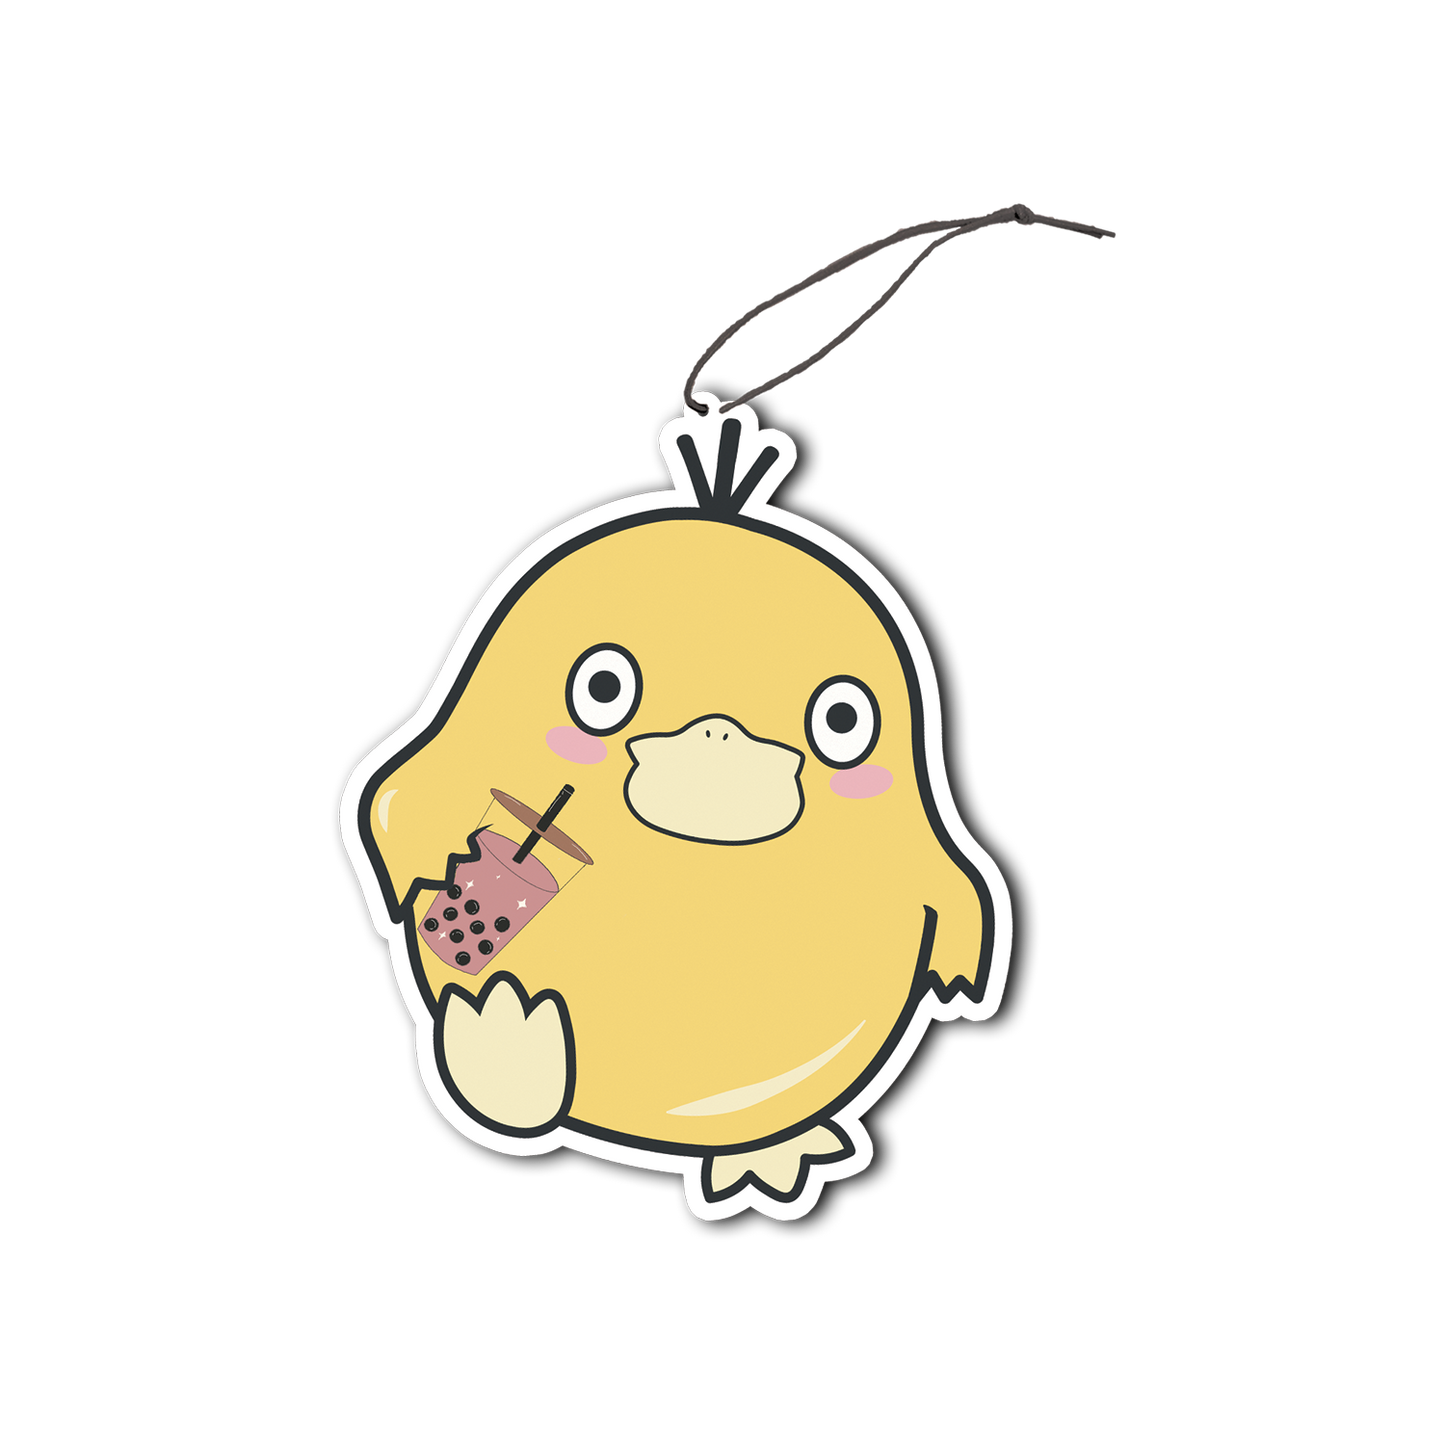 Psyduck with Boba Air Freshener design includes Pokemon Psyduck holding a pink boba cup.